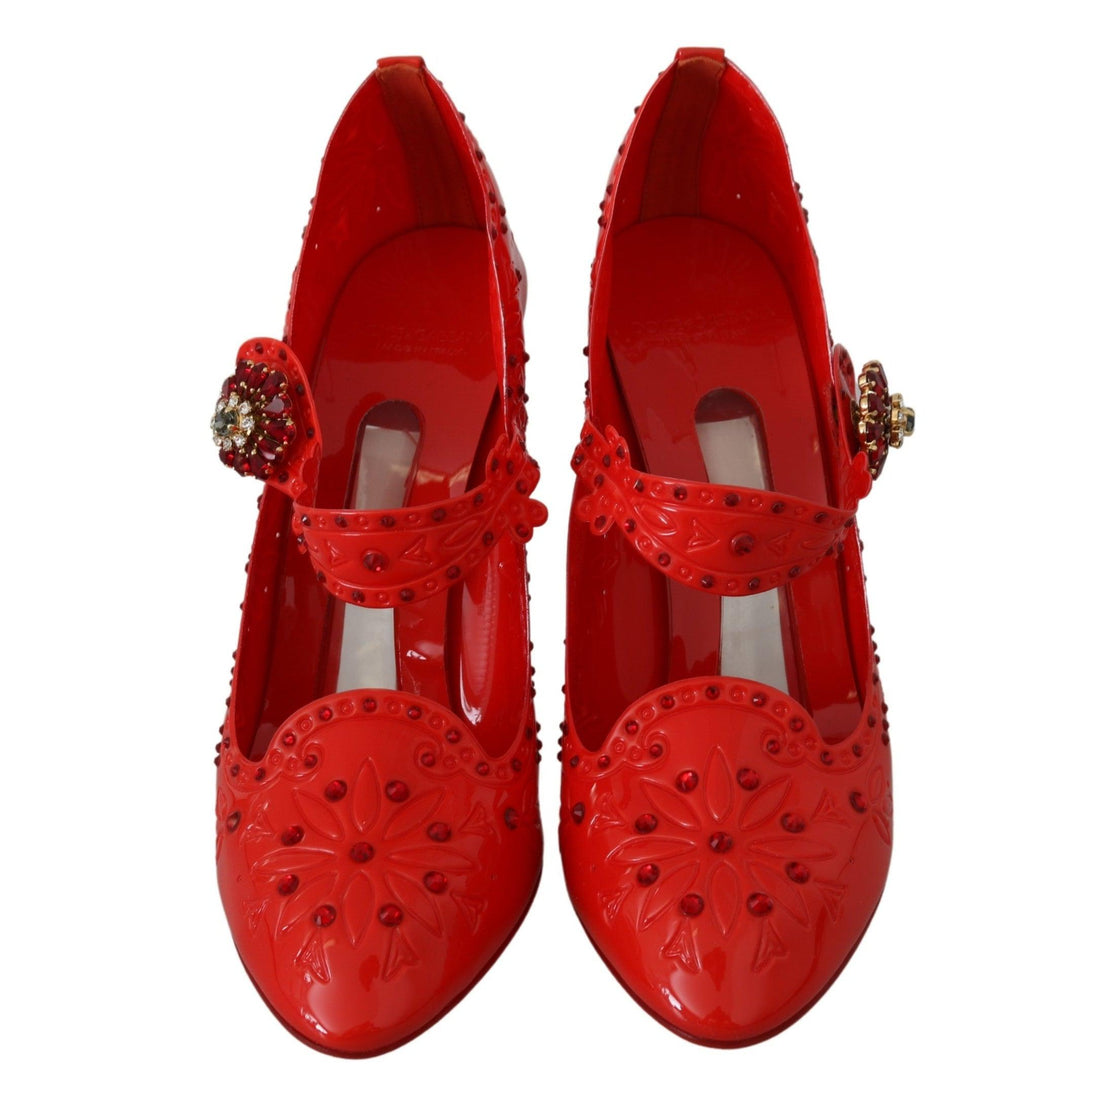 Dolce & Gabbana Red Floral Crystal CINDERELLA Heels Shoes - Paris Deluxe